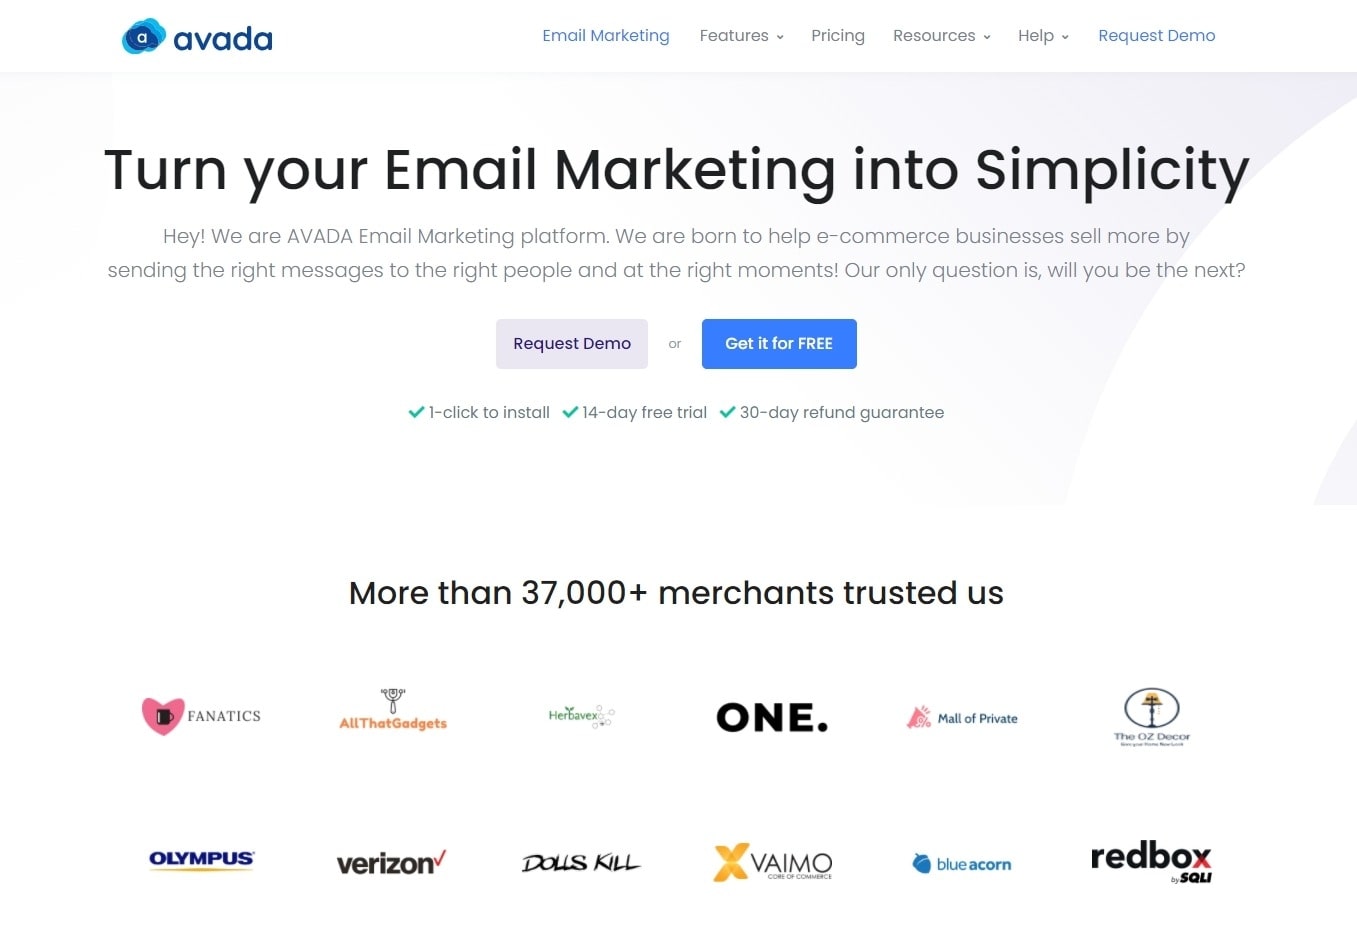 AVADA is a top place for eCommerce tools